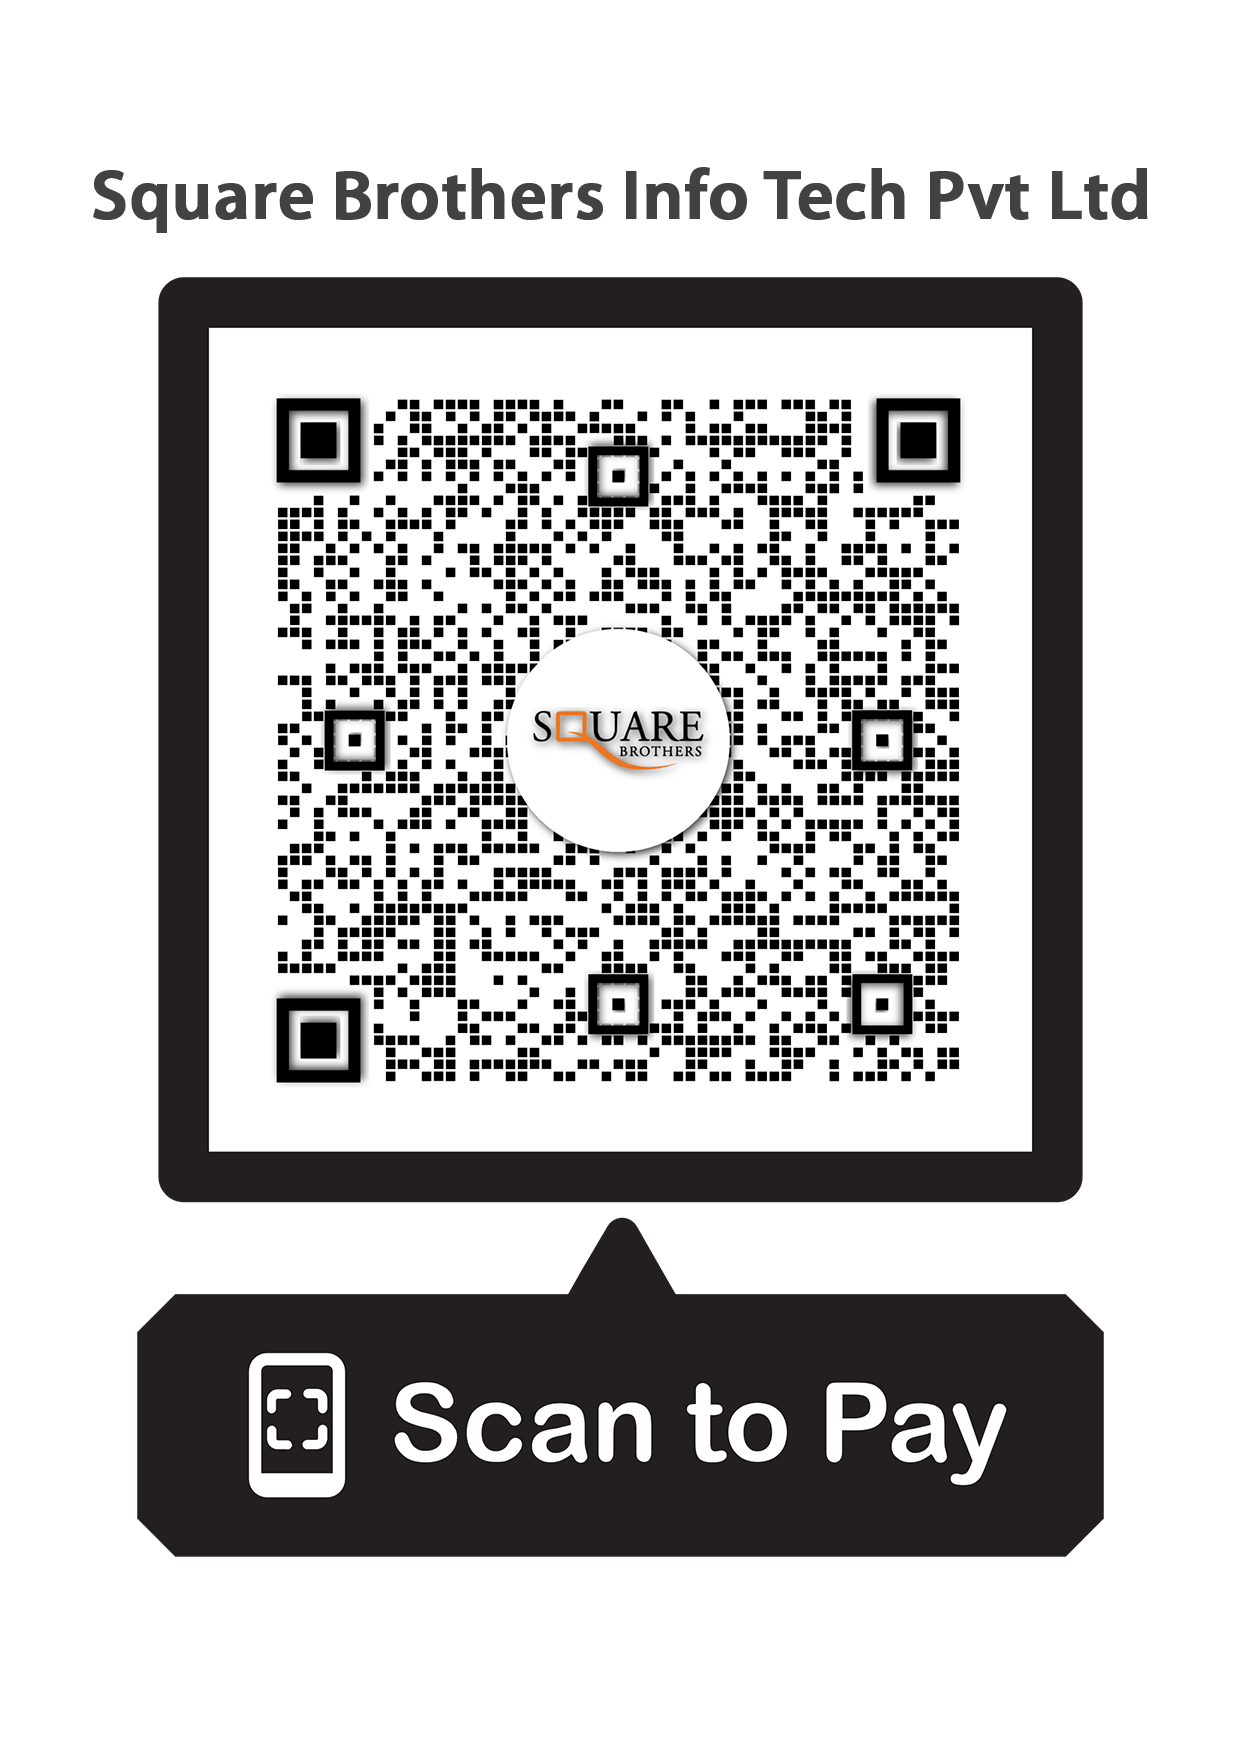 QR Code Pay - Square Brothers Indo Tech Pvt Ltd